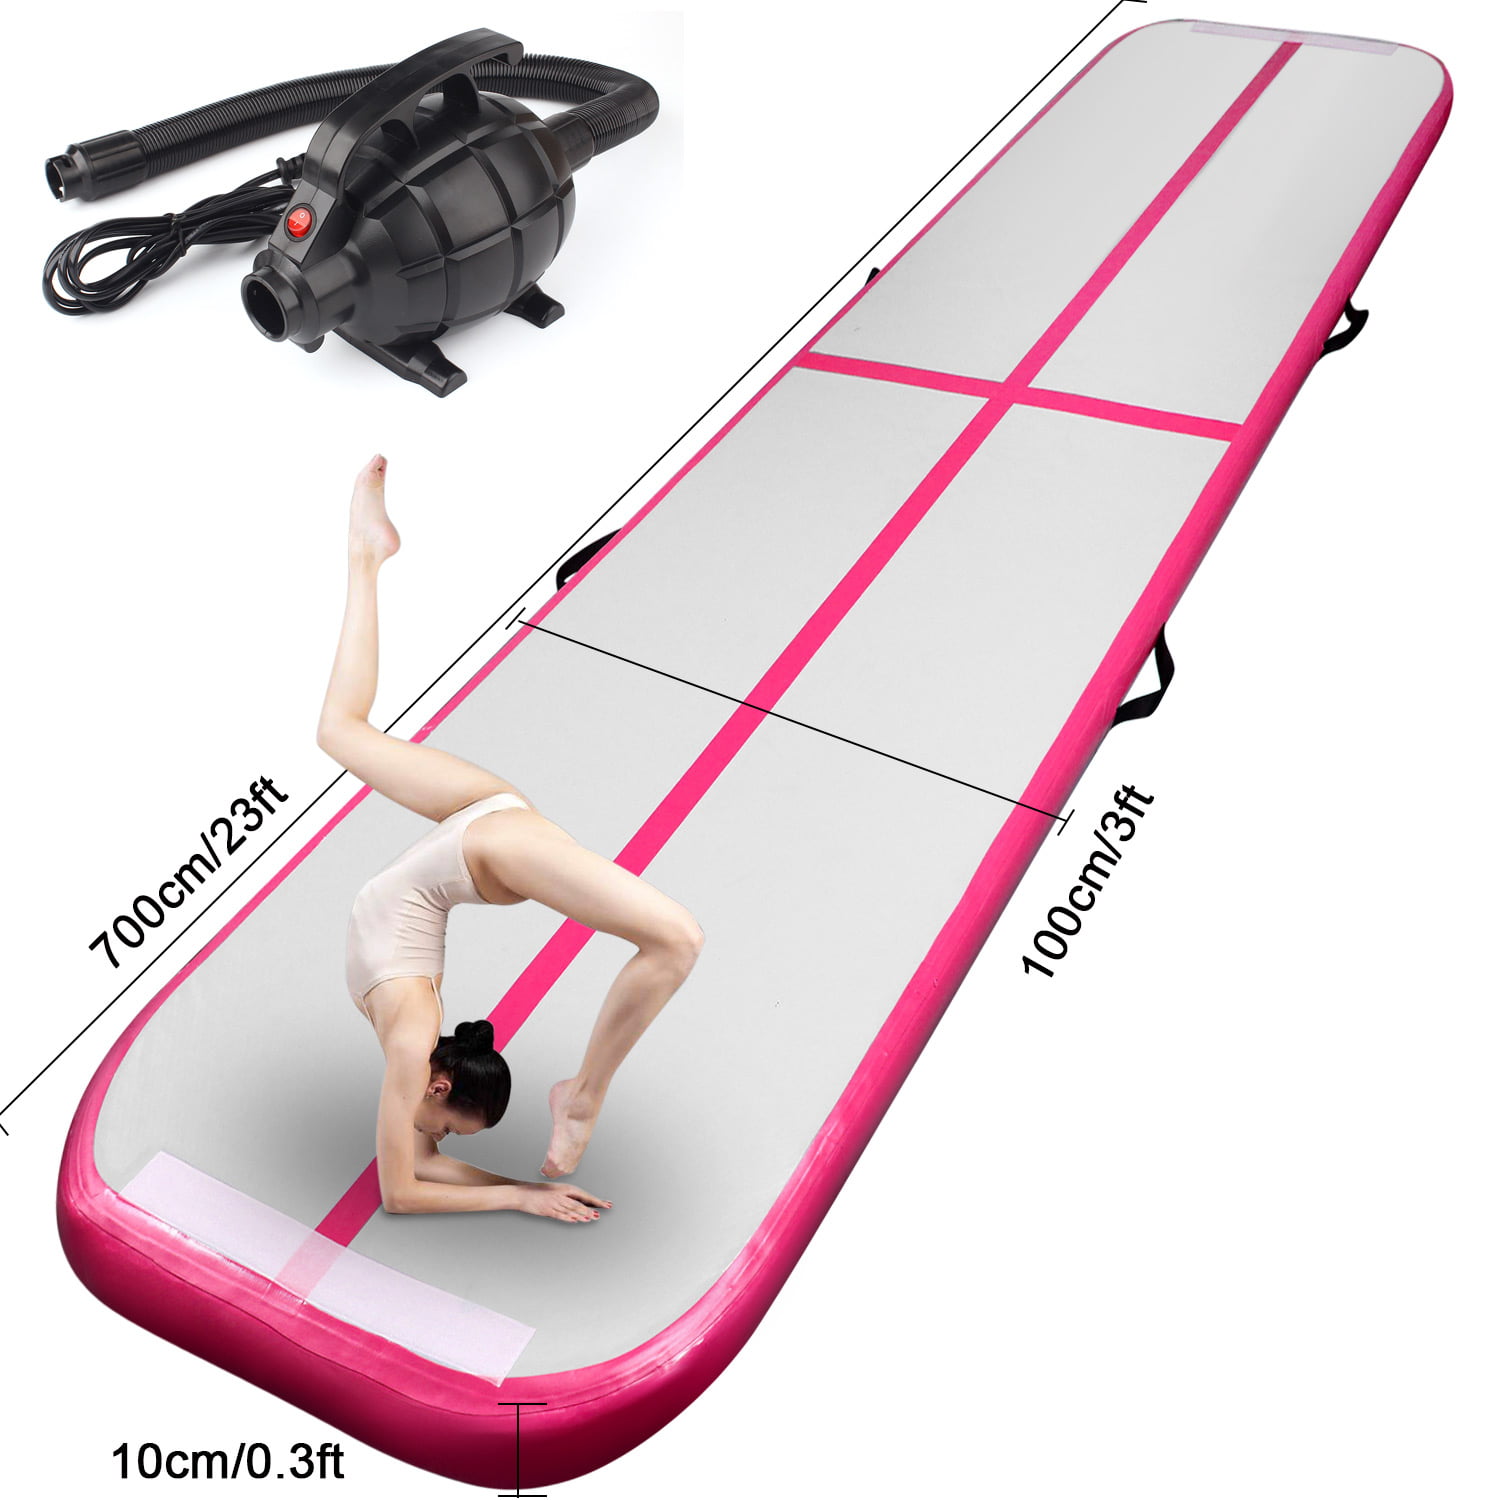 Tumbling,Parkour Home Floor ibigbean Home Gym Tumbling Track mat Inflatable Gymnastics Mat with Pump for Practice Gymnastics 